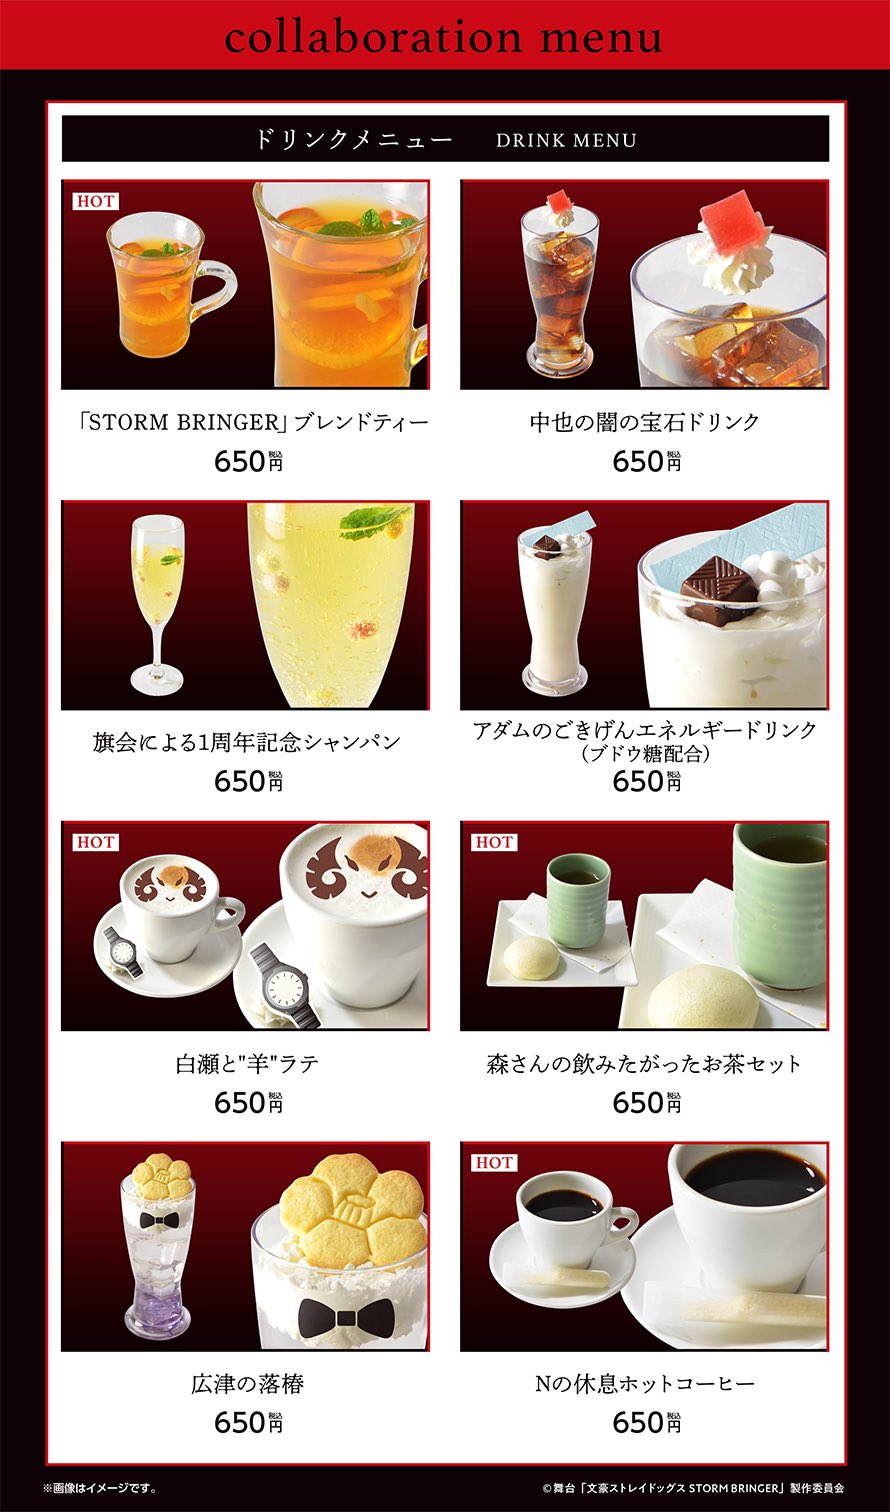 Bungo Stray Dogs 文豪ストレイドッグス x Animate Cafe - Geeky Travels & Fandoms